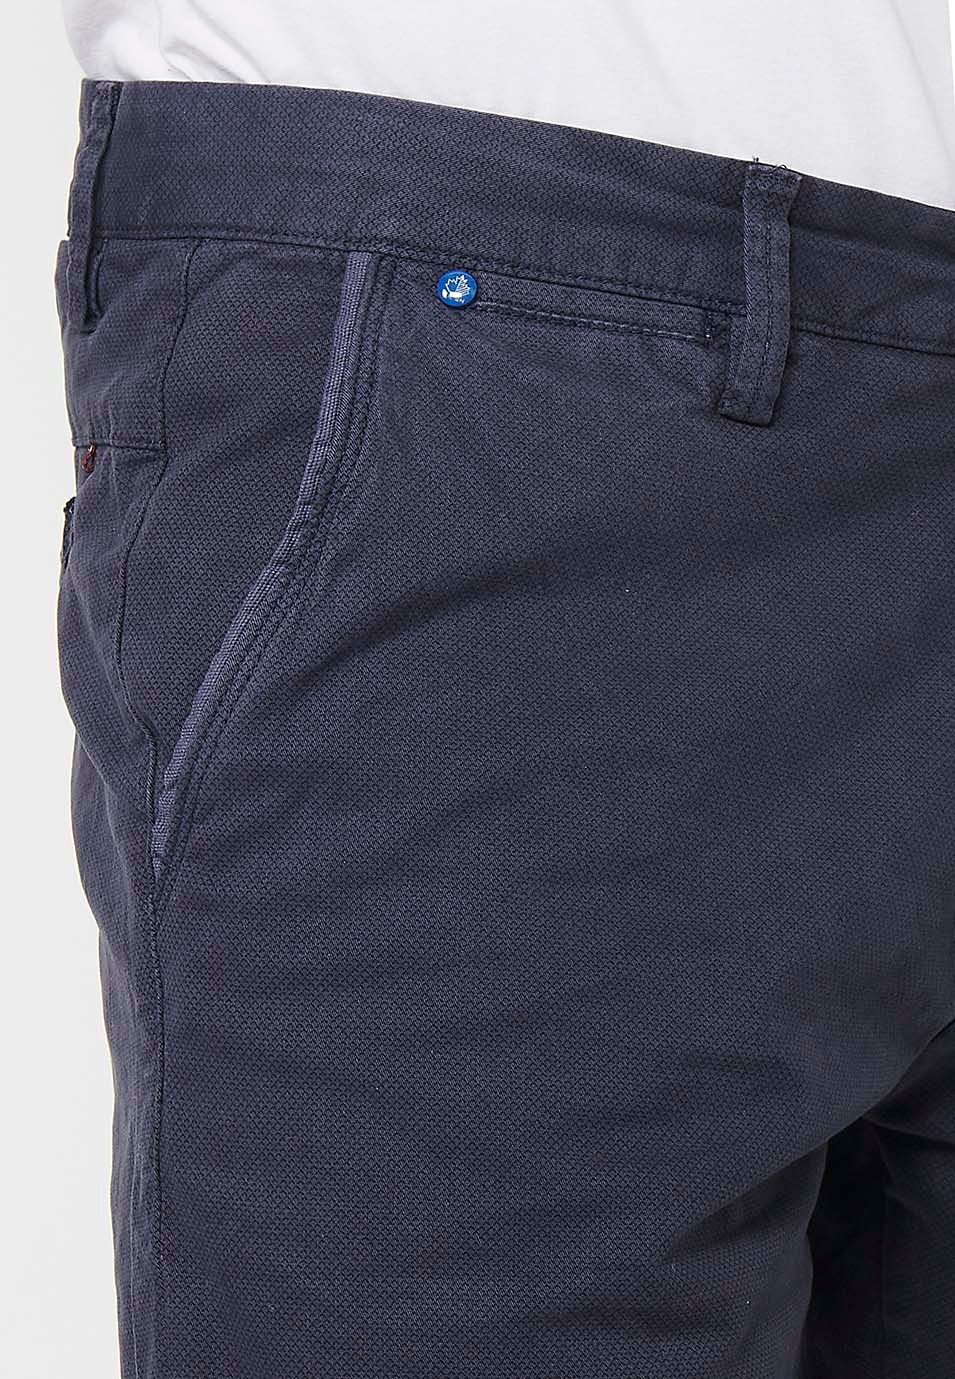 Bermuda Chino shorts with turn-up finish with front zipper and button closure with four pockets in Navy Color for Men 8